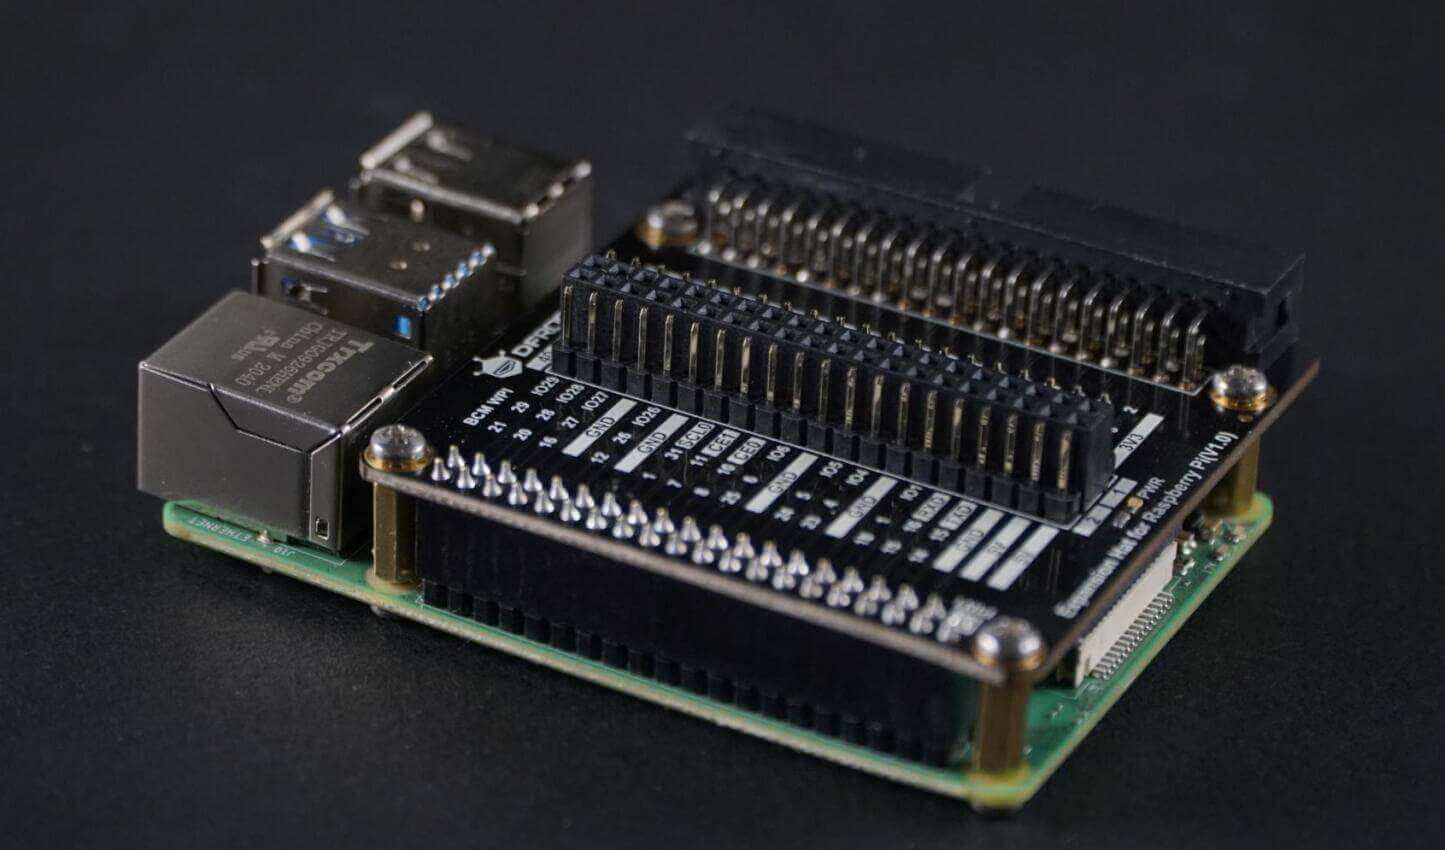 Stack HAT Raspberry pi I/O Expansion Shield Onboard 5 Sets 2x20 Connector to Directly Connect Multiple Expansion Functional Boards